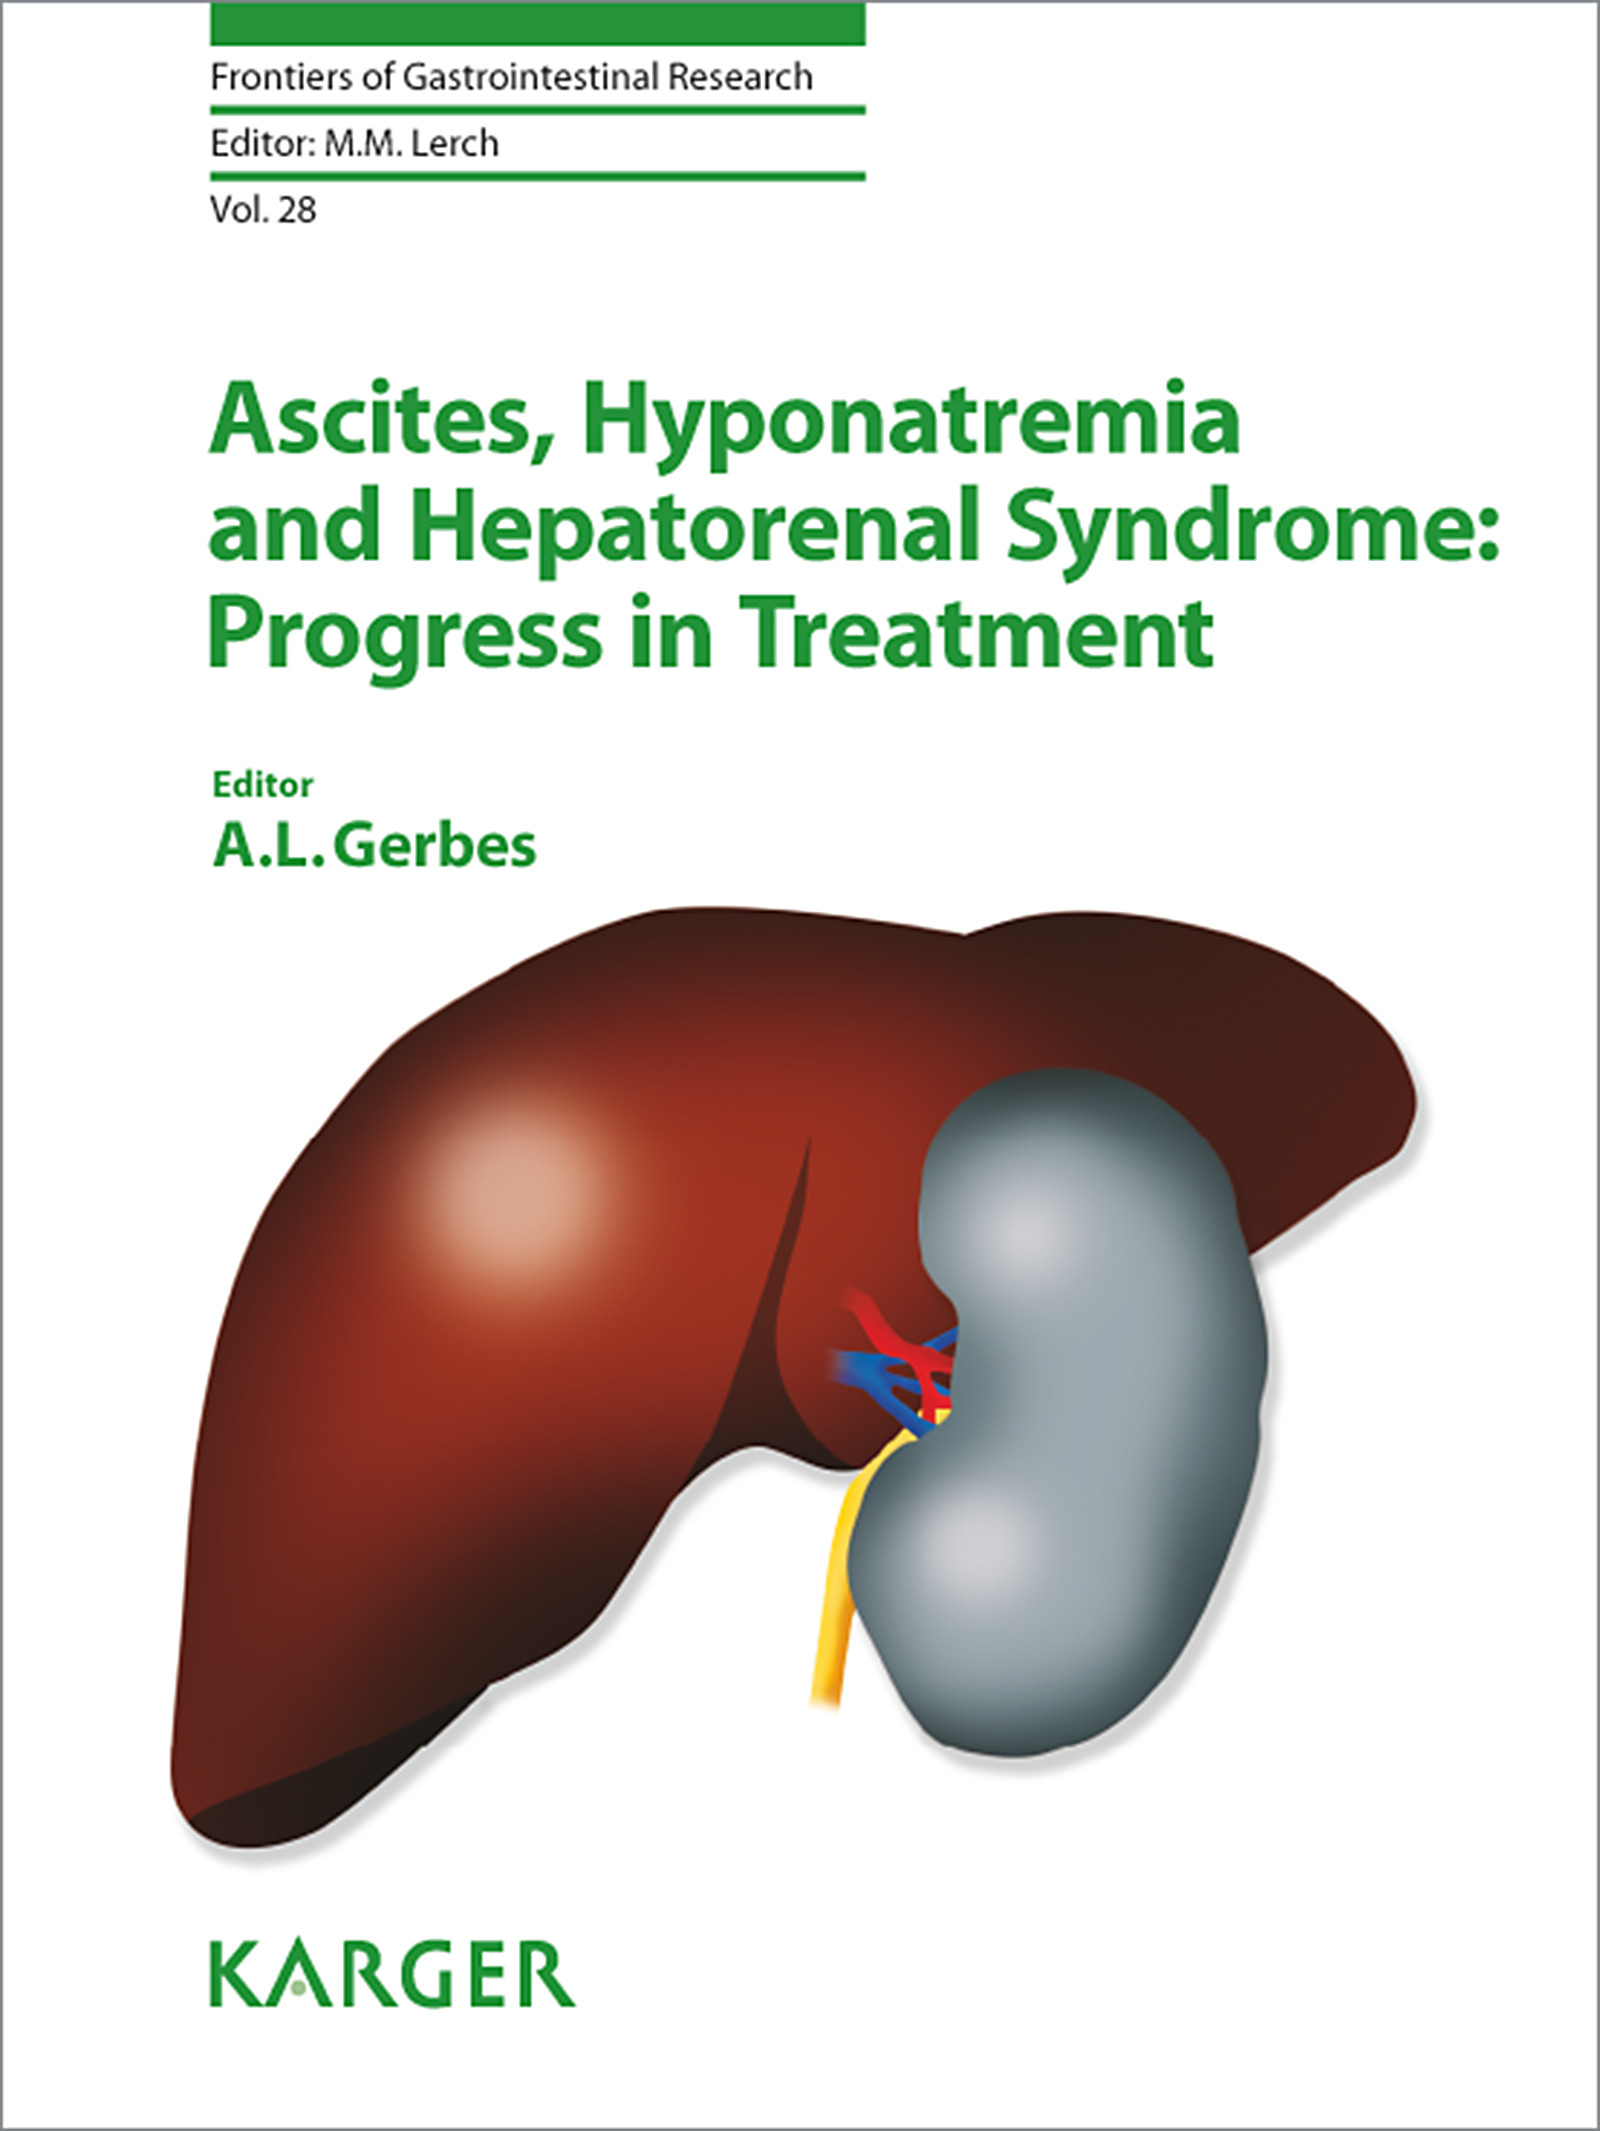 Ascites, Hyponatremia and Hepatorenal Syndrome: Progress in Treatment